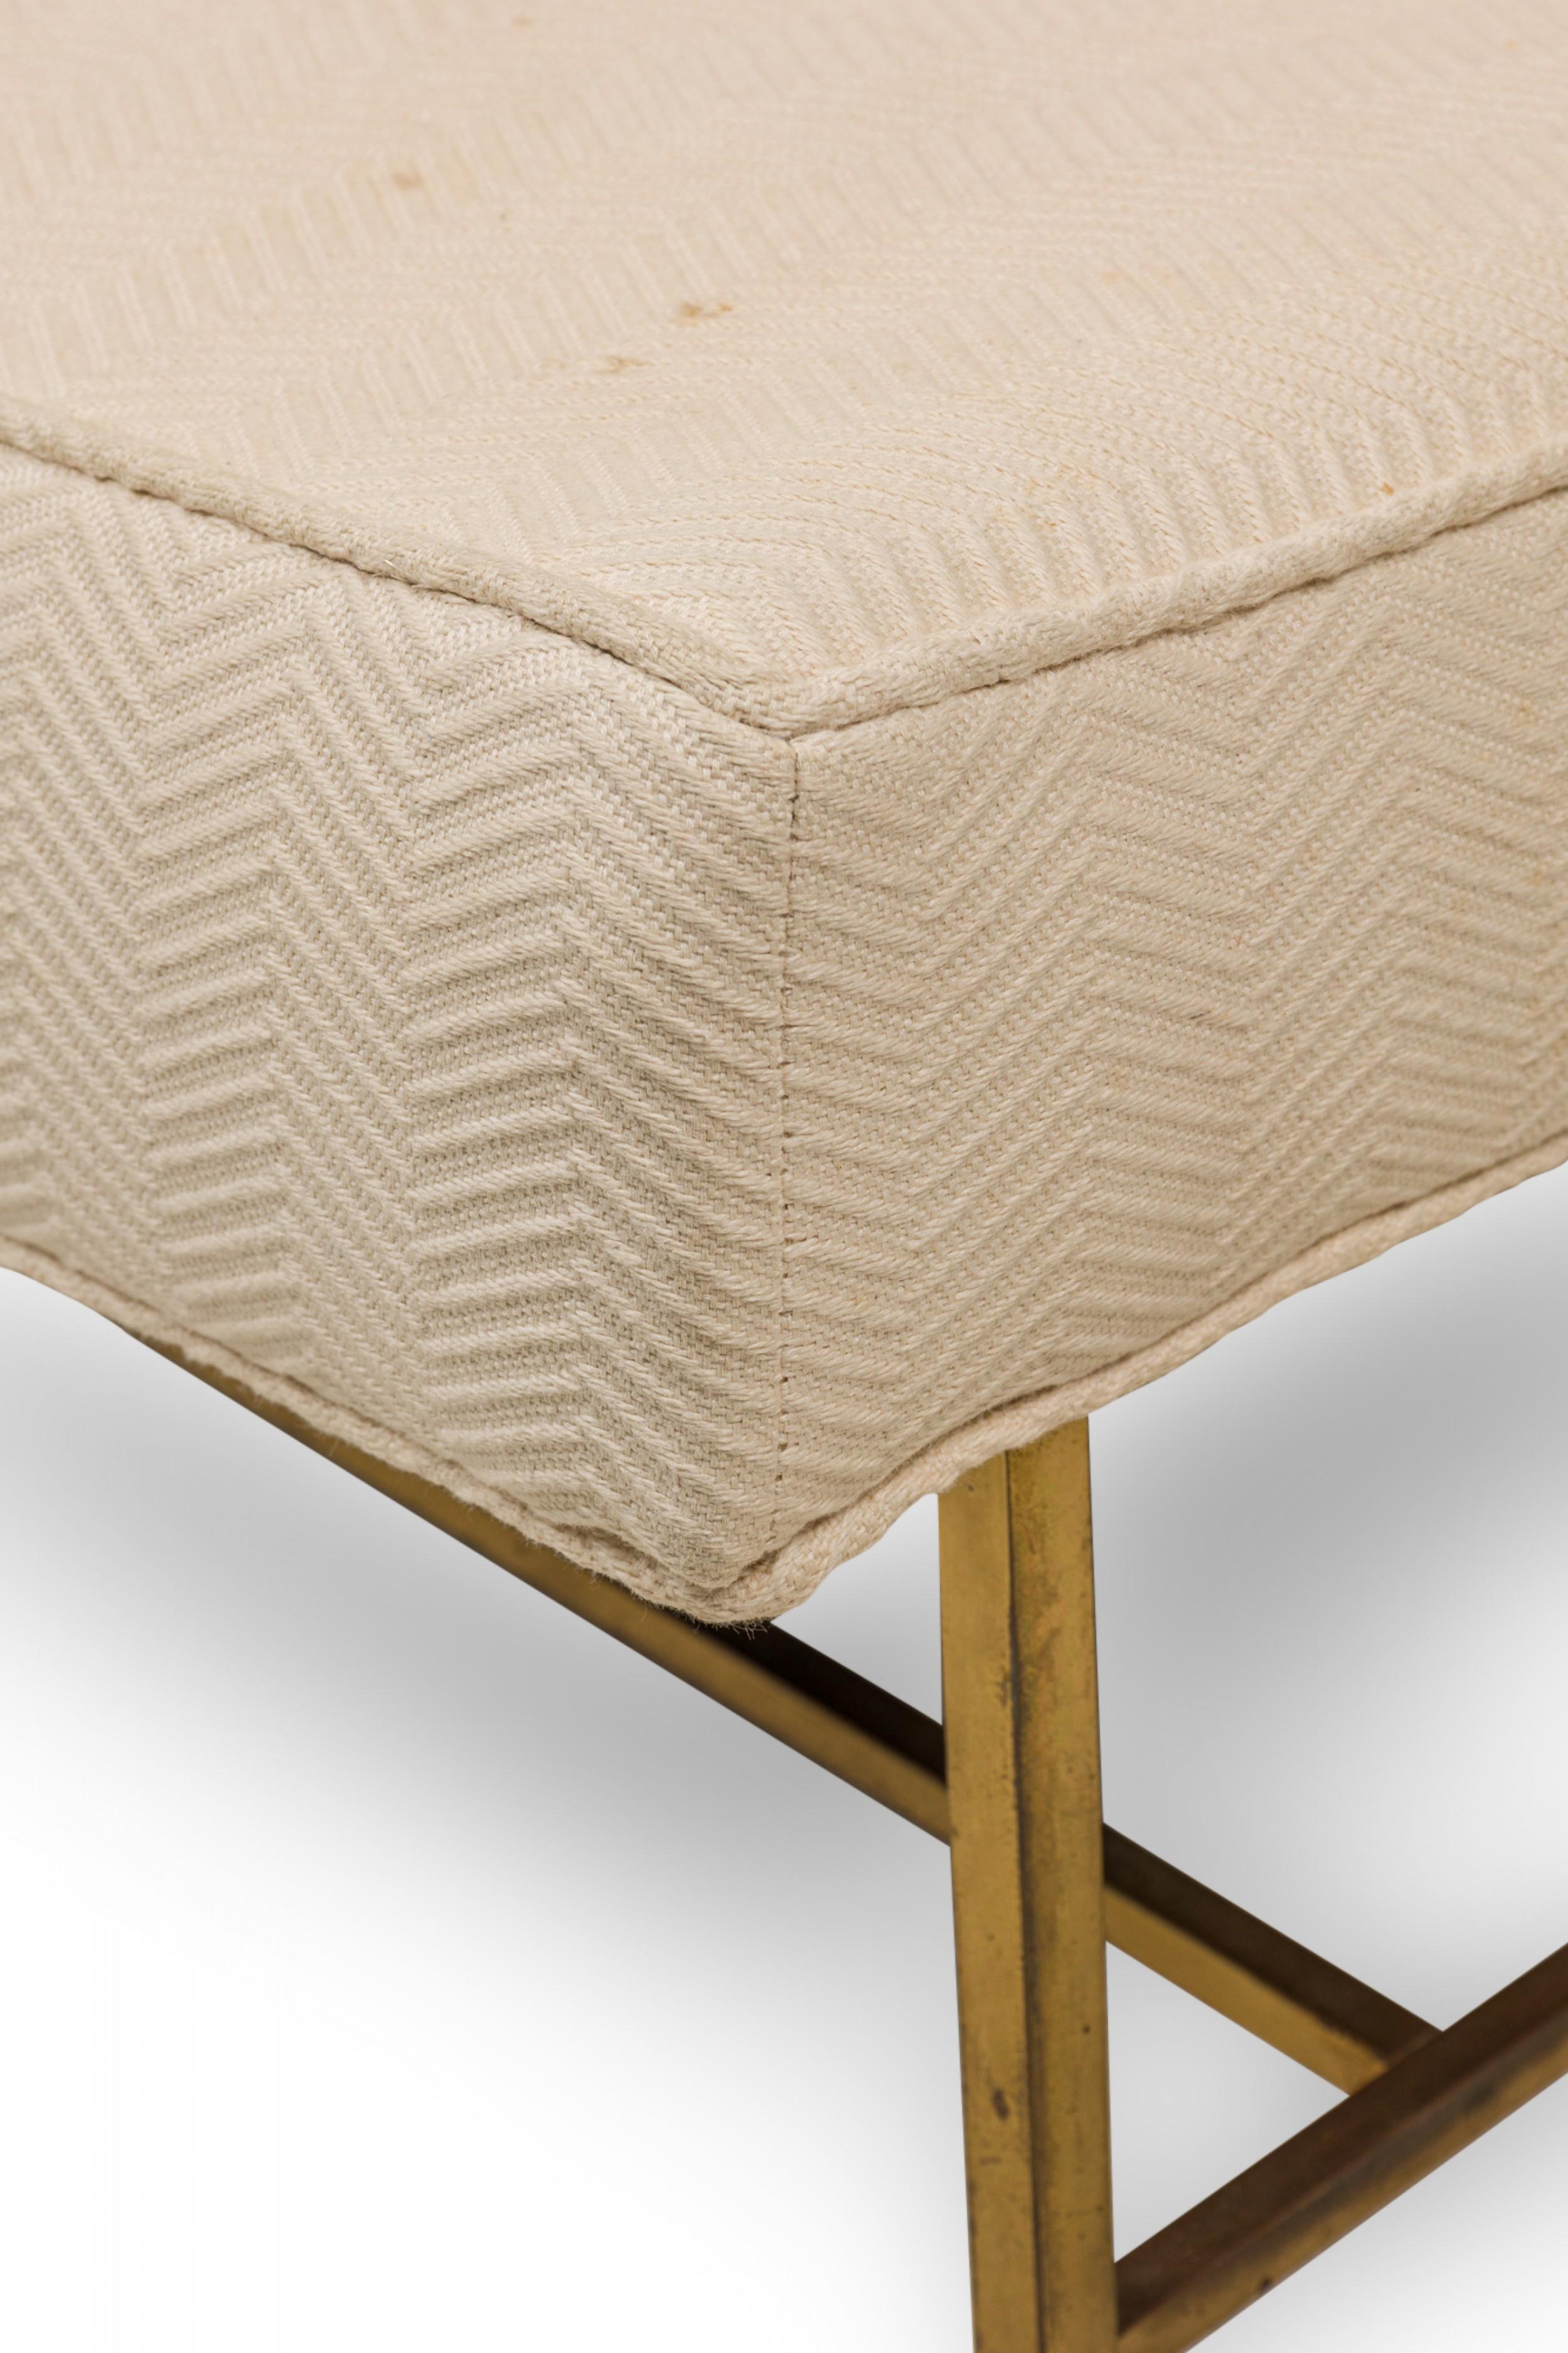 Pair of Harvey Probber Beige Zig-Zag Textured Upholstery and Brass Slipper Chair For Sale 5